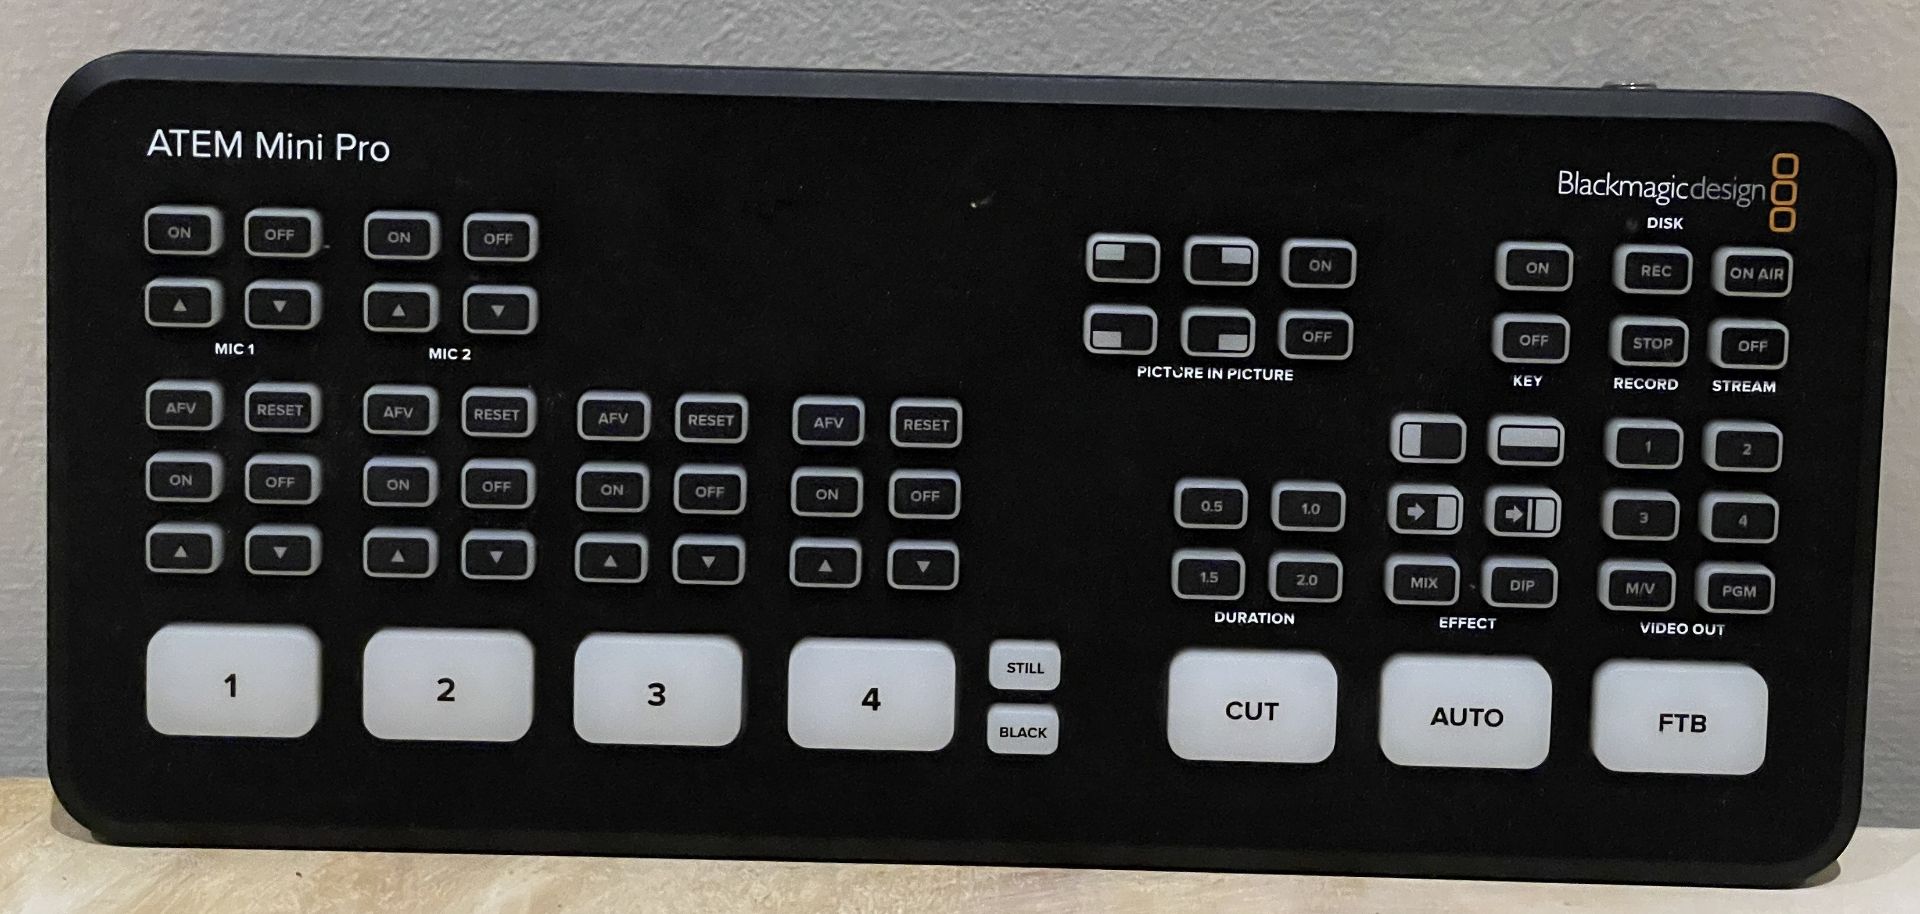 Blackmagic ATEM Mini Pro Switcher (Location: Brentwood. Please Refer to General Notes)